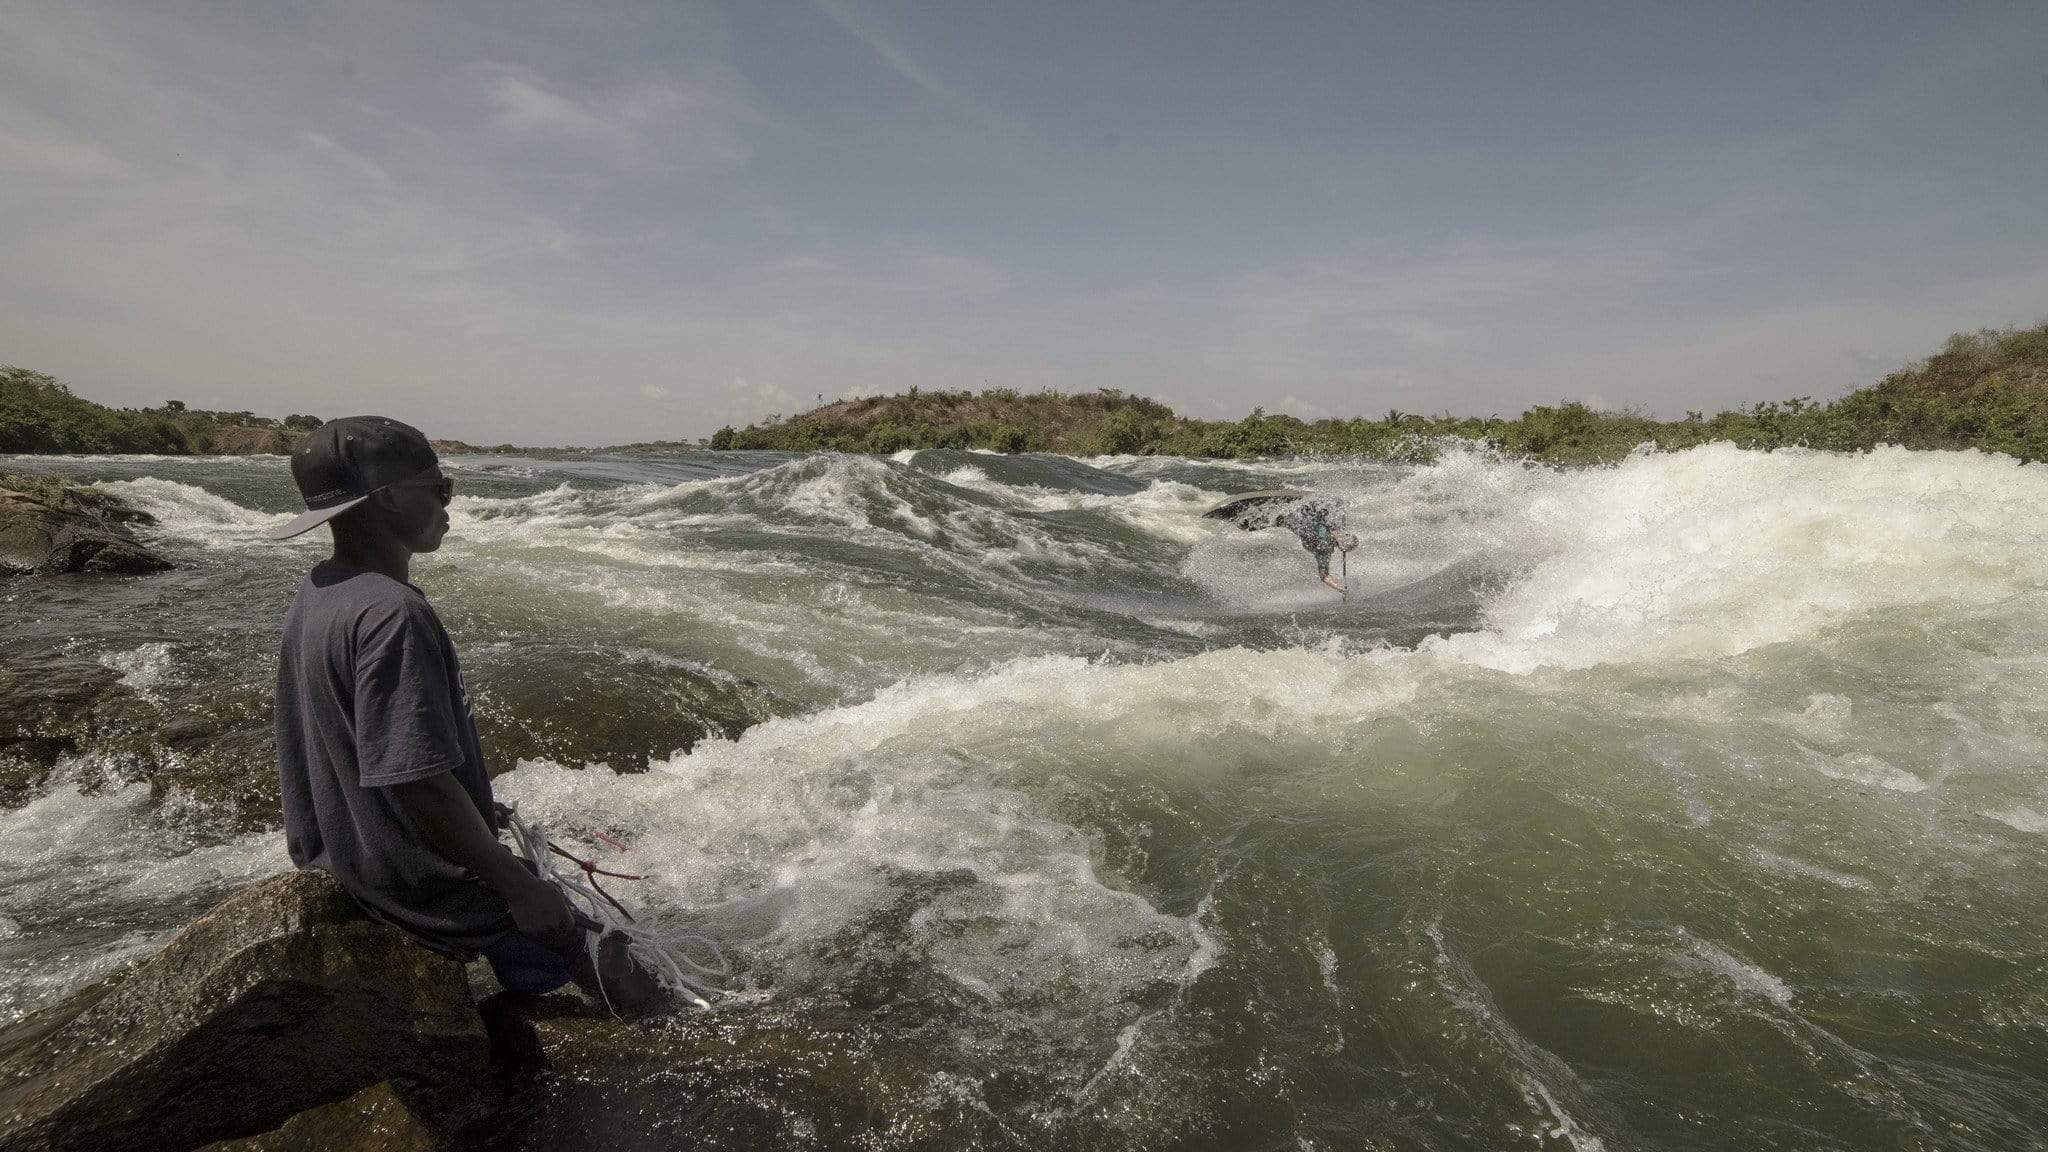 Nile Air | Bren's top 5 moments from the White Nile - dewerstone